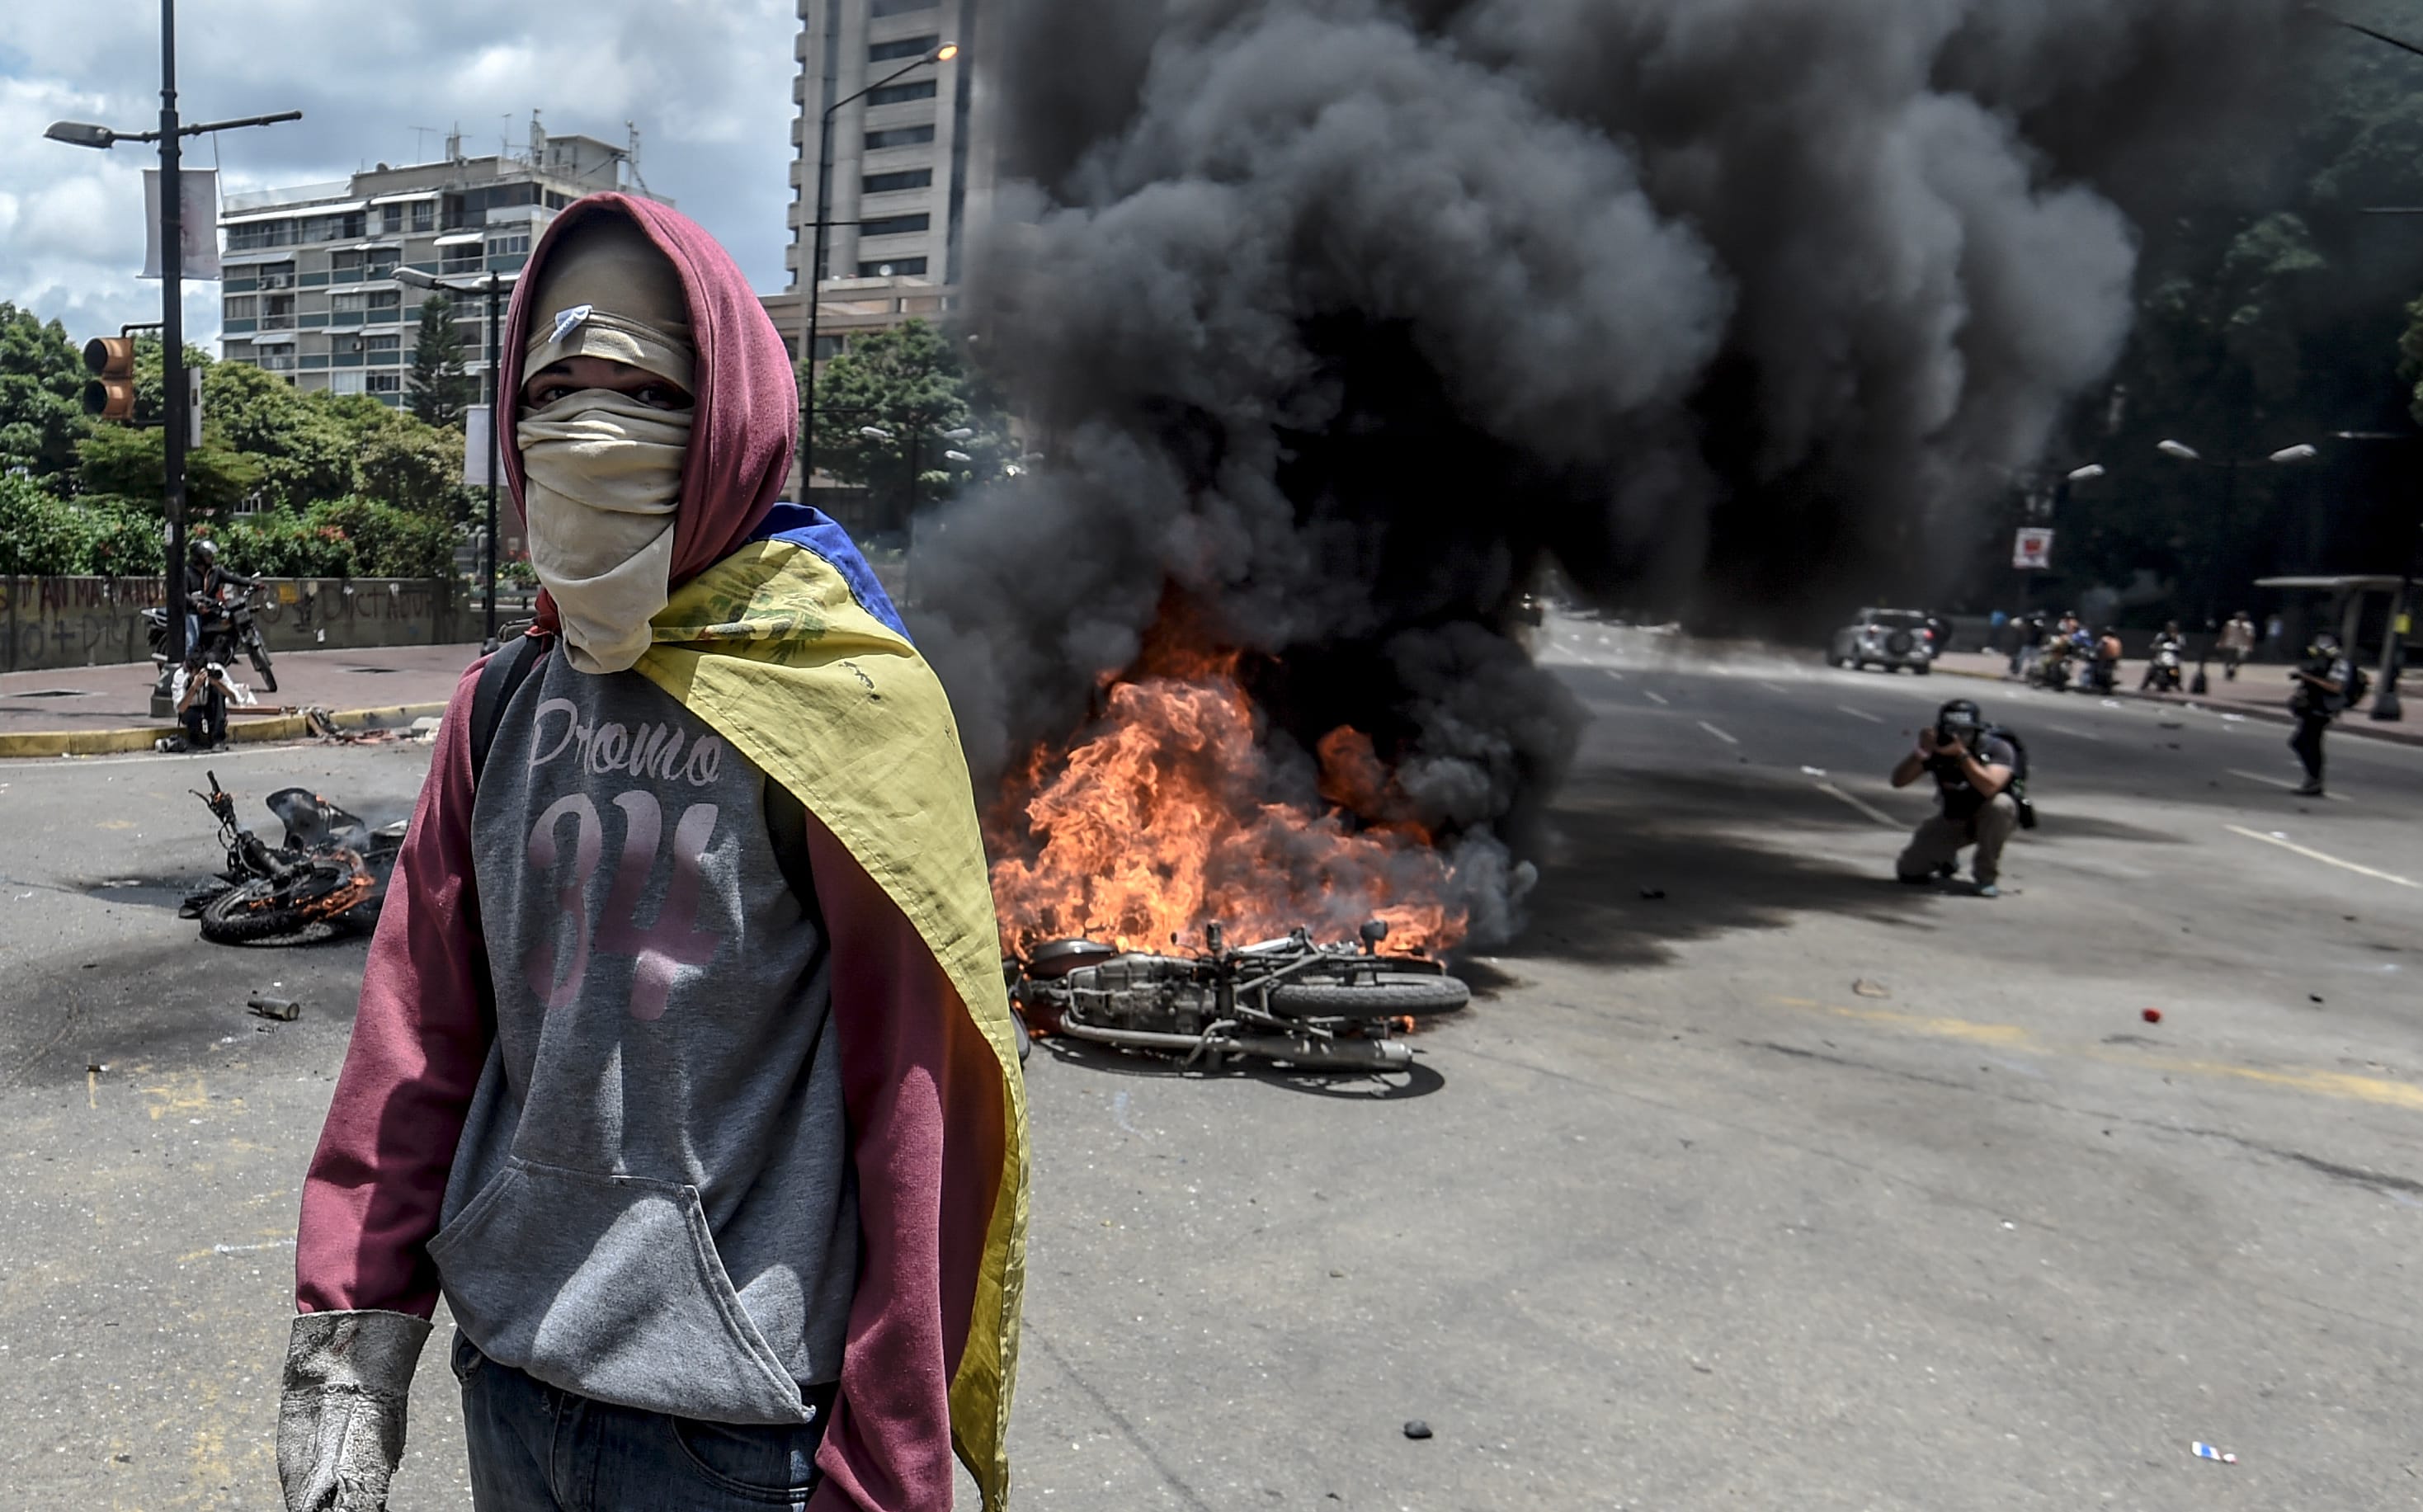 An anti-government activist stands in front of burning police bikes during a protest in Caraca against the elections for a Constituent Assembly.